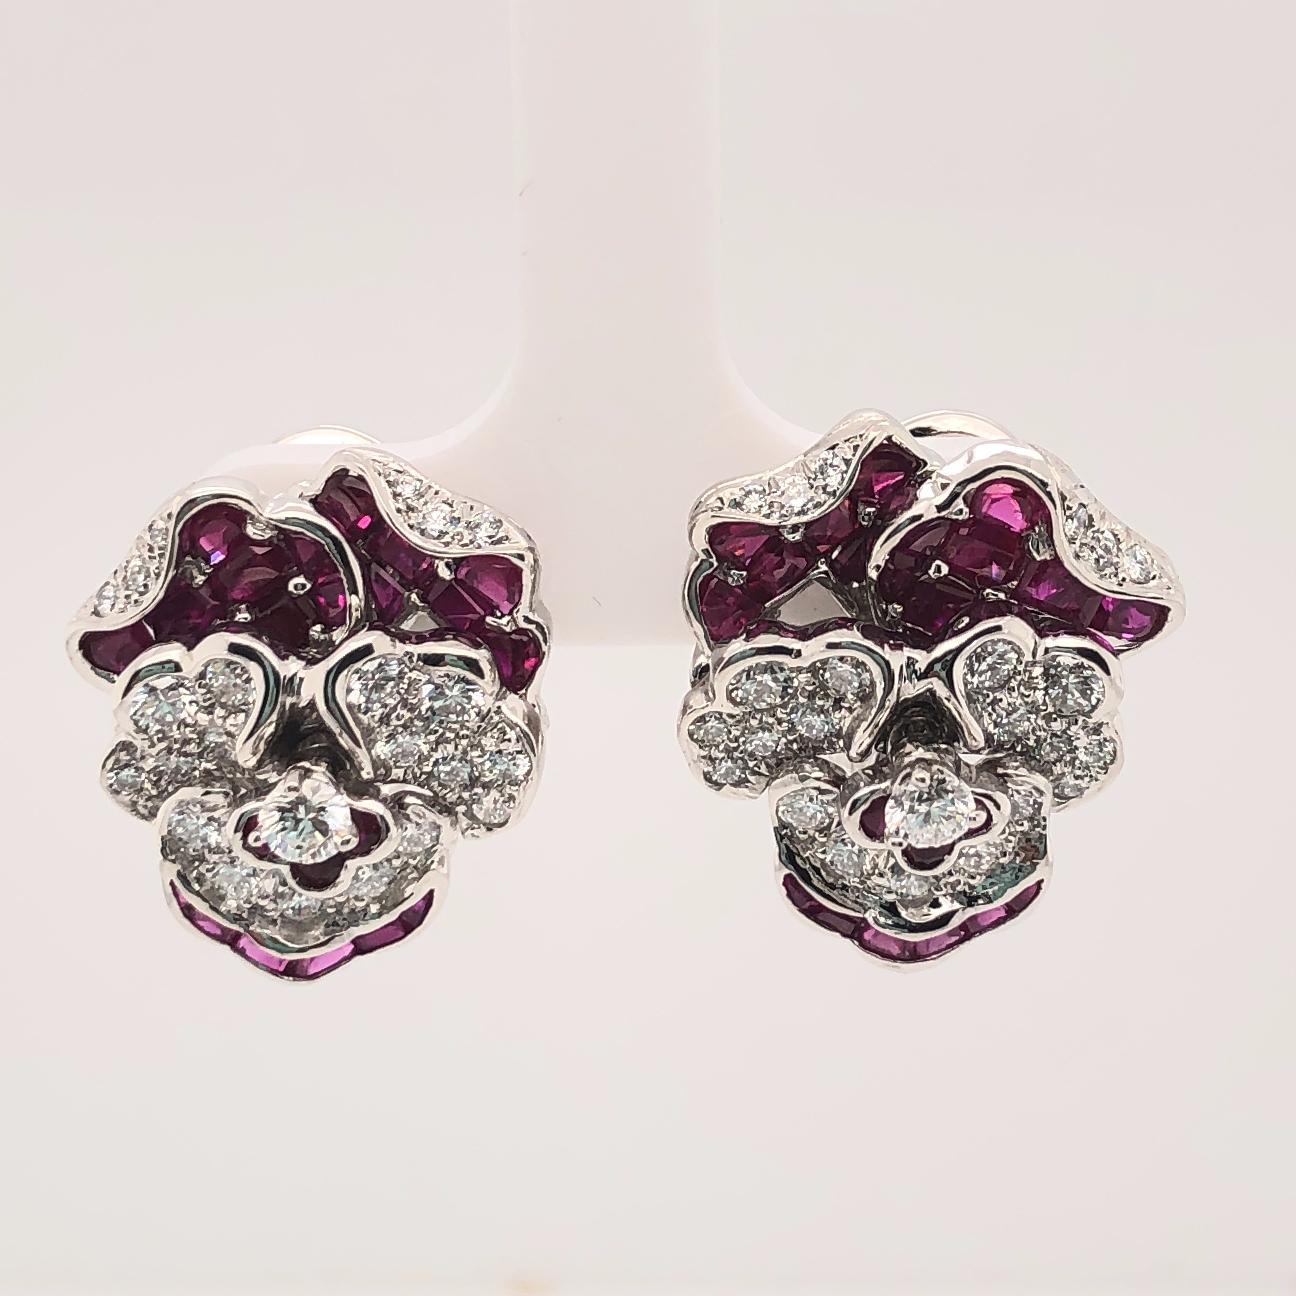 Oscar Heyman platinum pansy earrings contain 26 square rubies (3.77cts), 12 baguette rubies (0.38cts), 6 round rubies (0.2cts) and 48 round diamonds (1.61cts). It is stamped with the makers mark, IRID PLAT, and serial number 706346.

Earrings